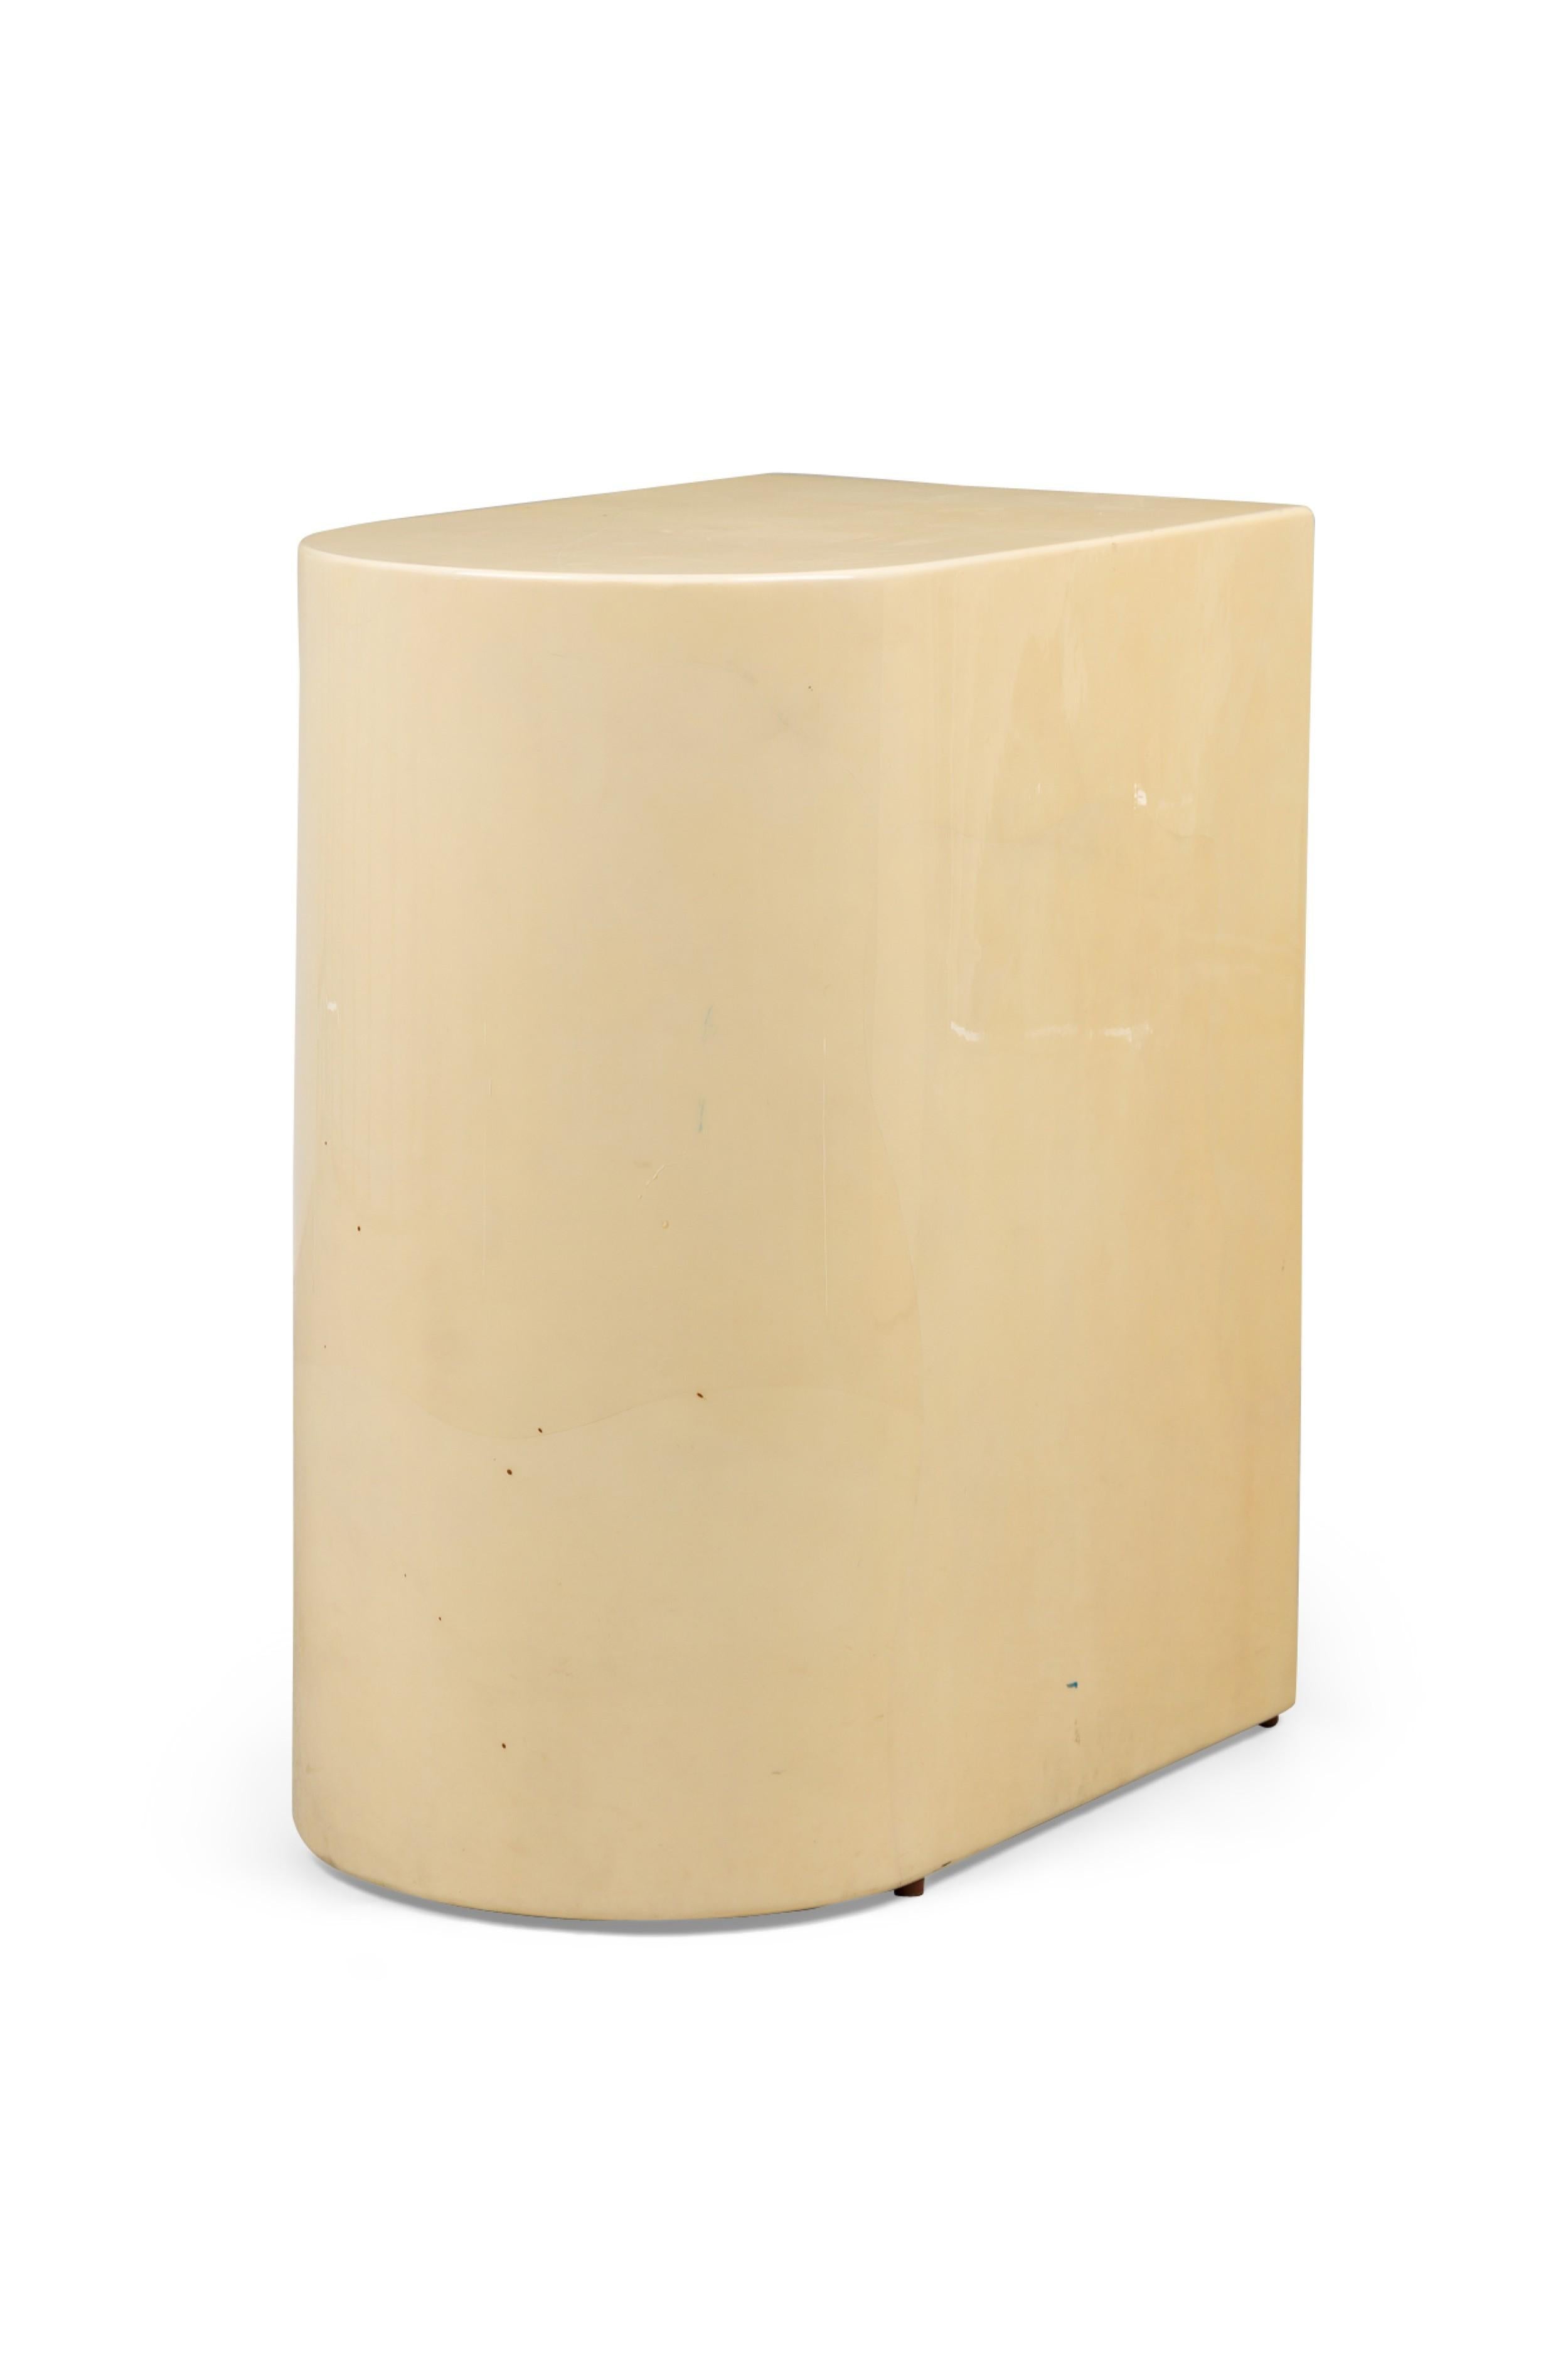 Mid-Century American beige goat skin pedestal / end table base) with a rounded front and flat back (KARL SPRINGER) (3 identical REG4050 and similar oval model REG4050C in LIC warehouse)
